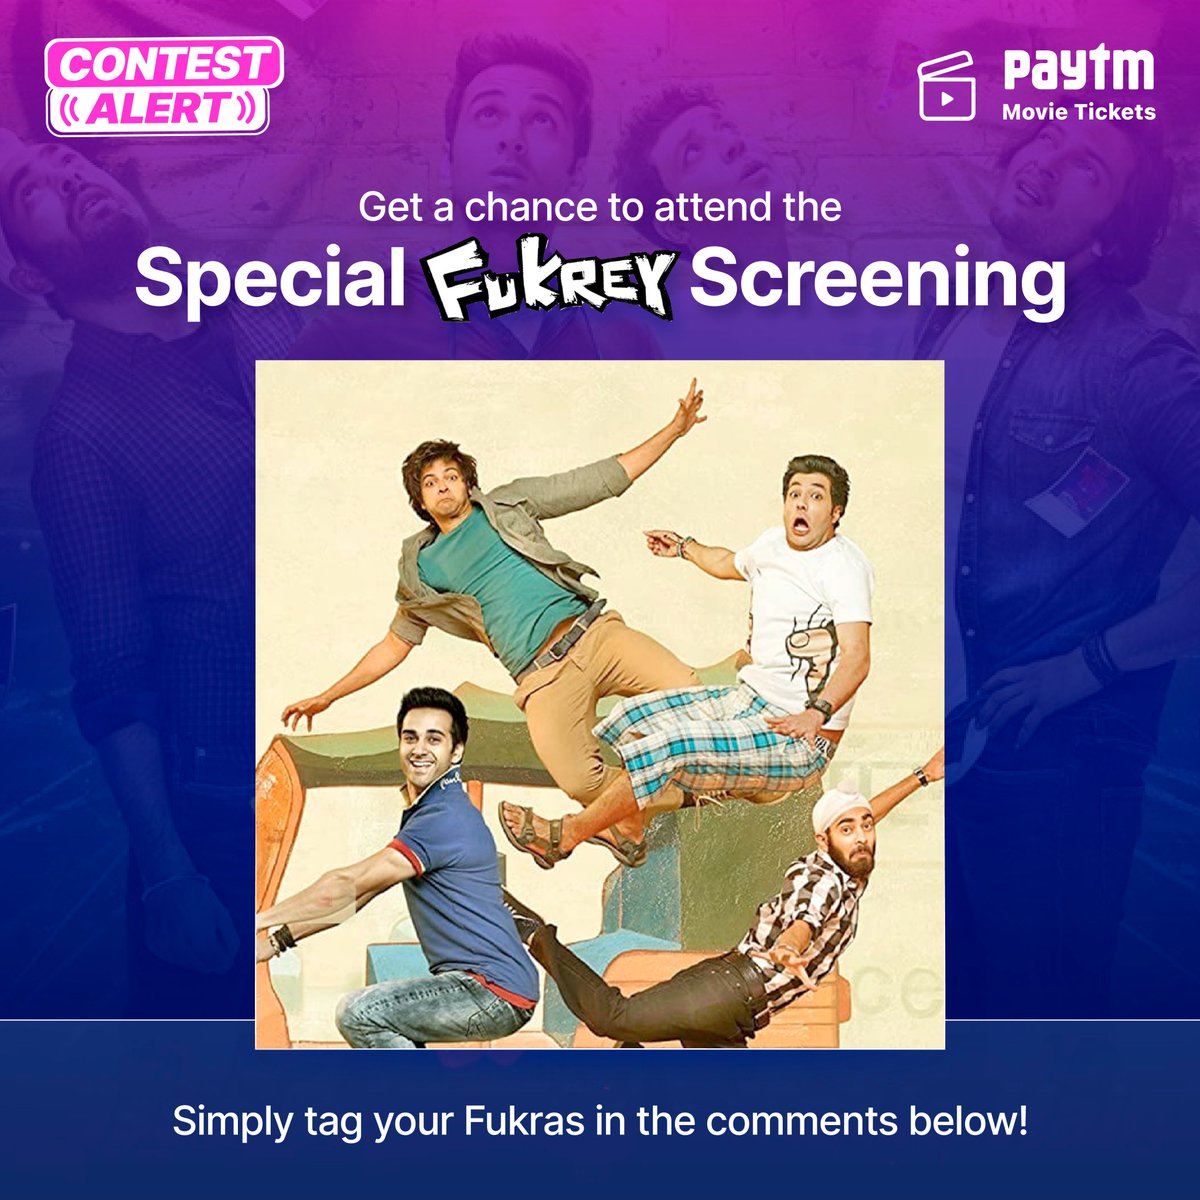 #ContestAlert ⚠️

The iconic #Fukrey completes 10 years next week and here's your chance to attend a special screening for it in Mumbai!

Simply follow us, RT this post & tag your Fukras in the comments below! 👇

P.S. - Do mention your city too.

@excelmovies #10YearsOfFukrey